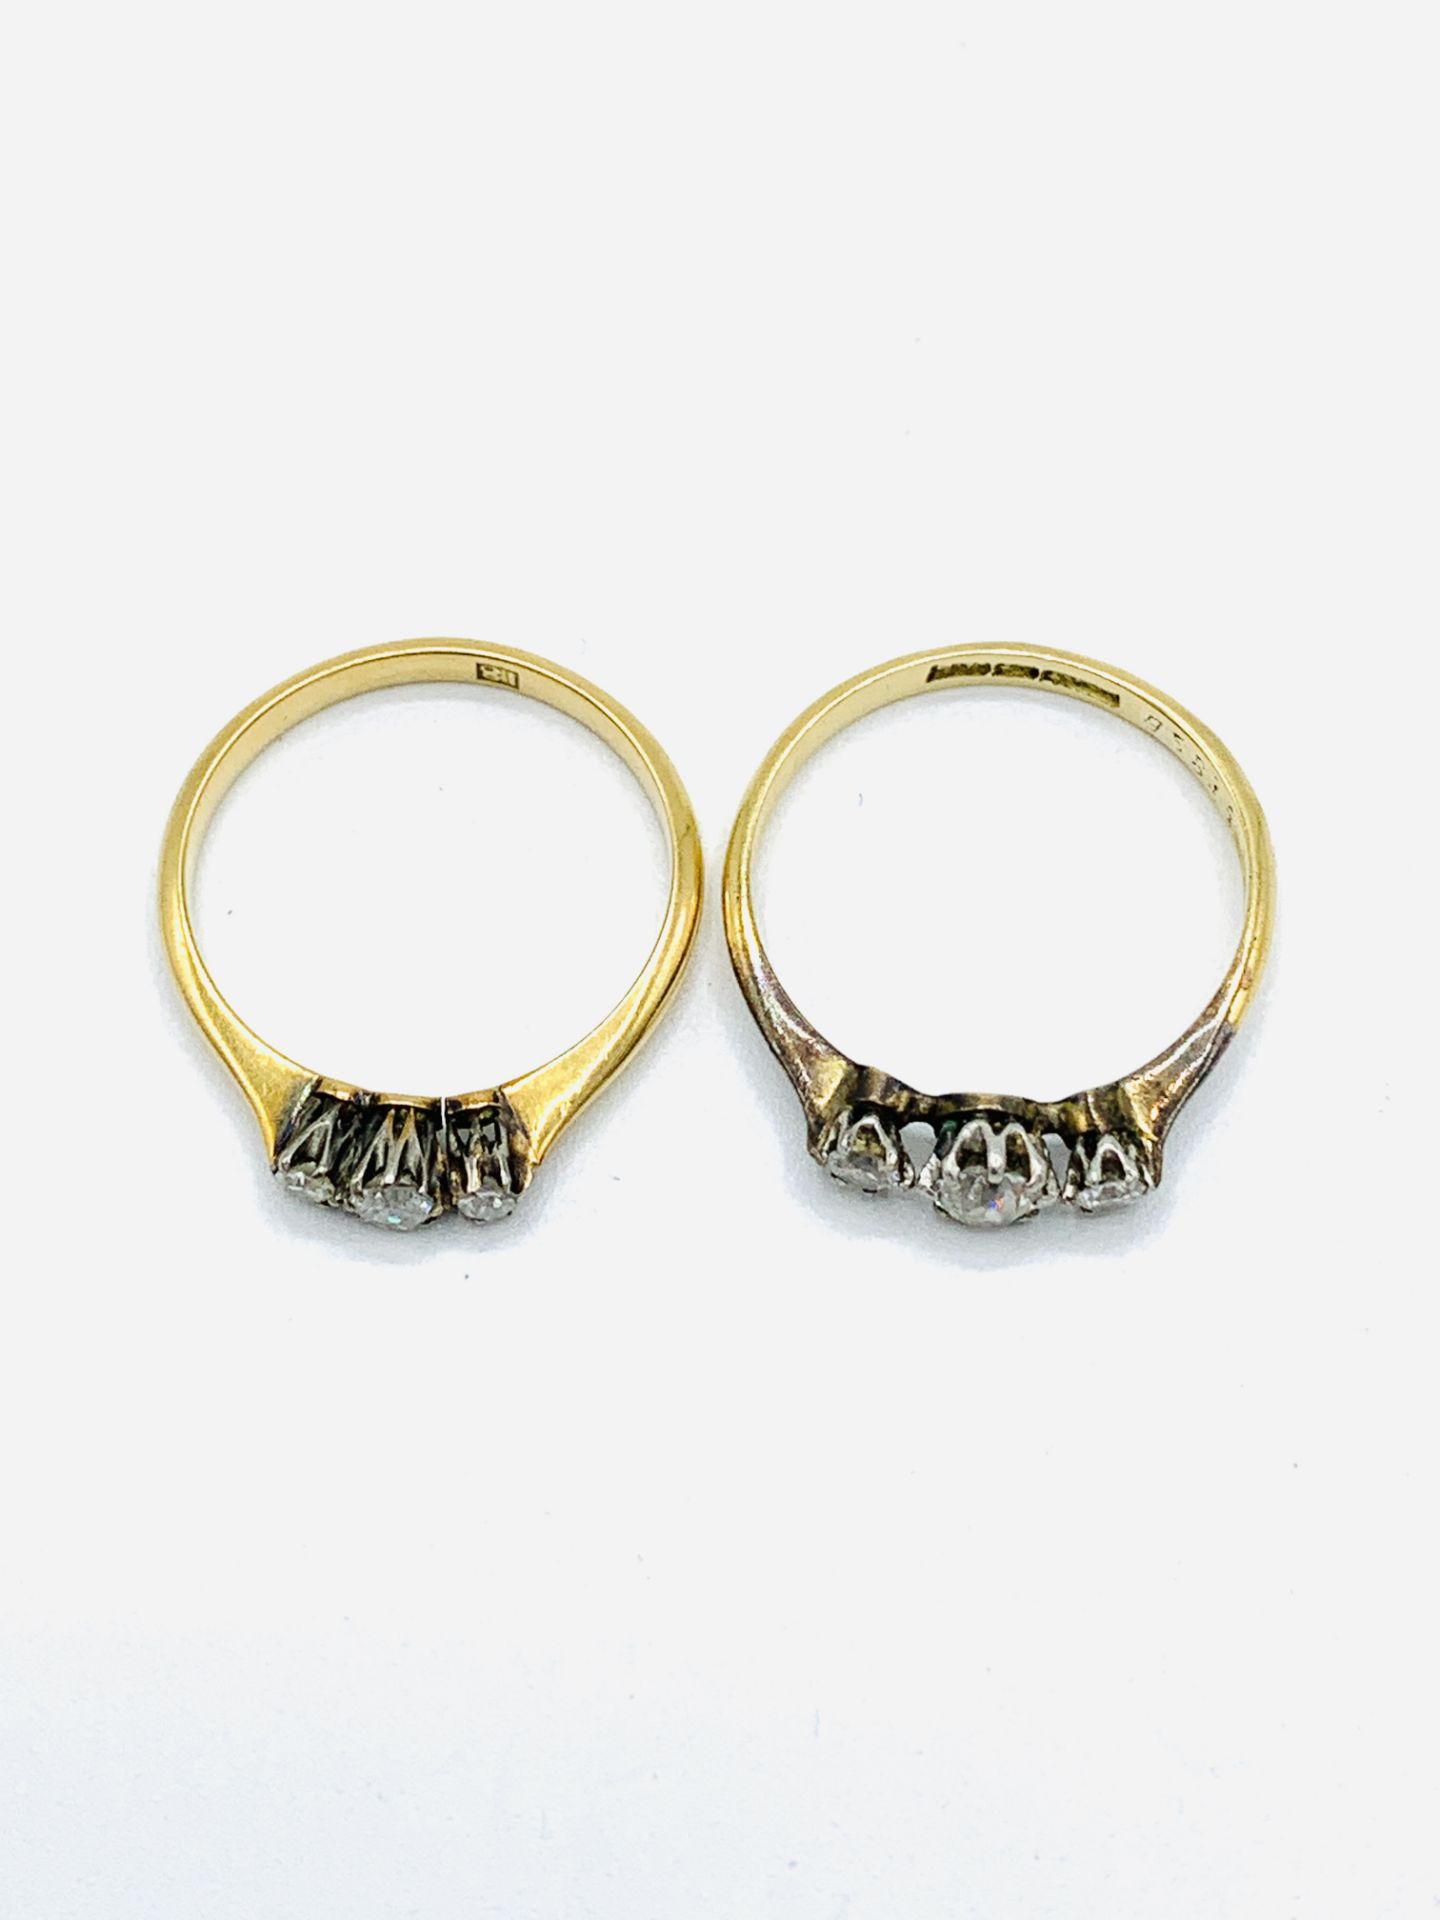 Two 18ct gold and 3 diamond rings - Image 2 of 4